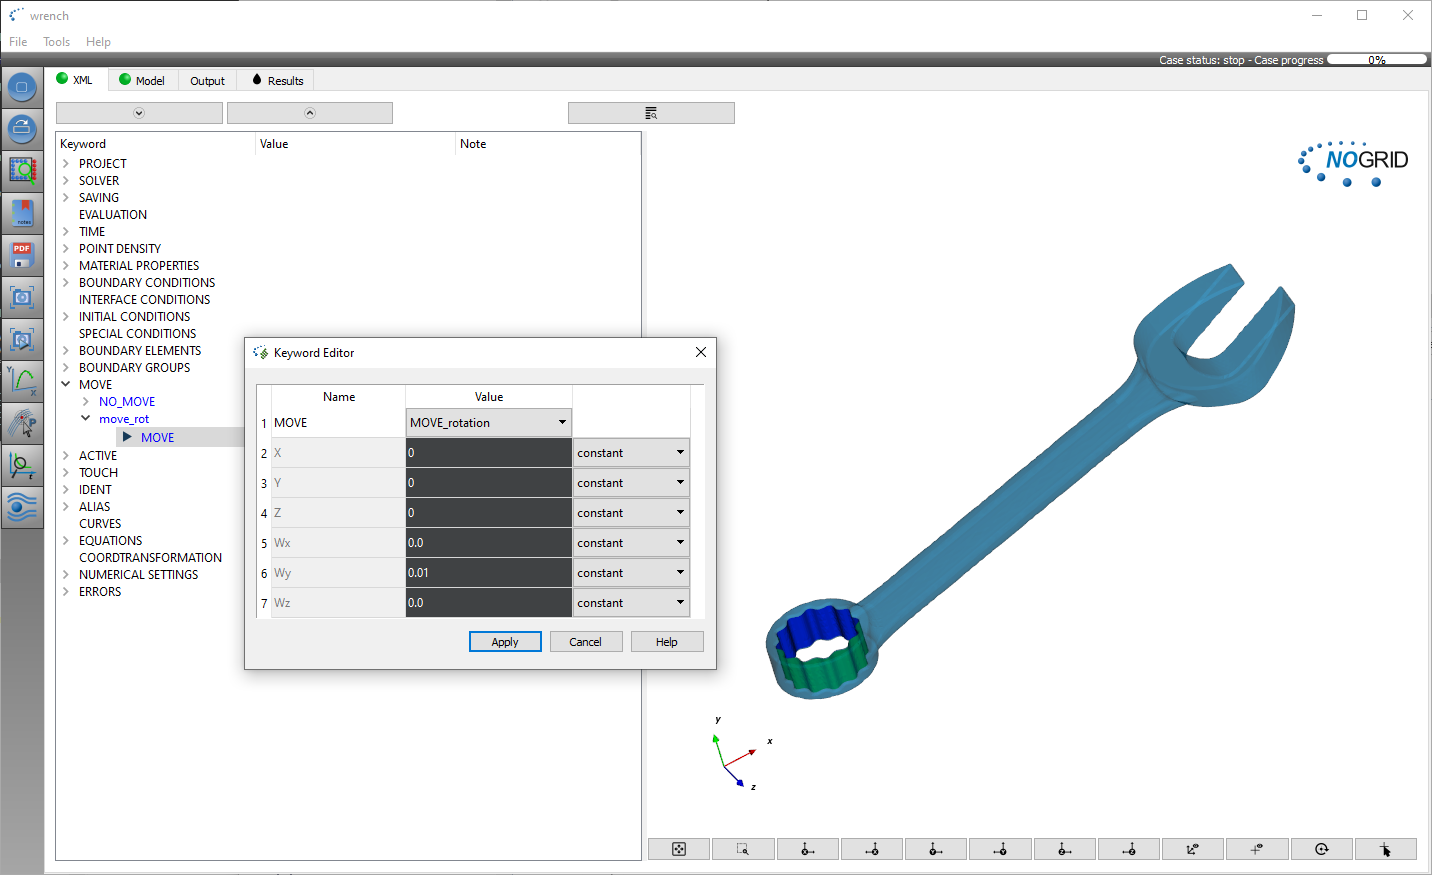 Wrench tool stress analysis setup within NOGRID points' GUI